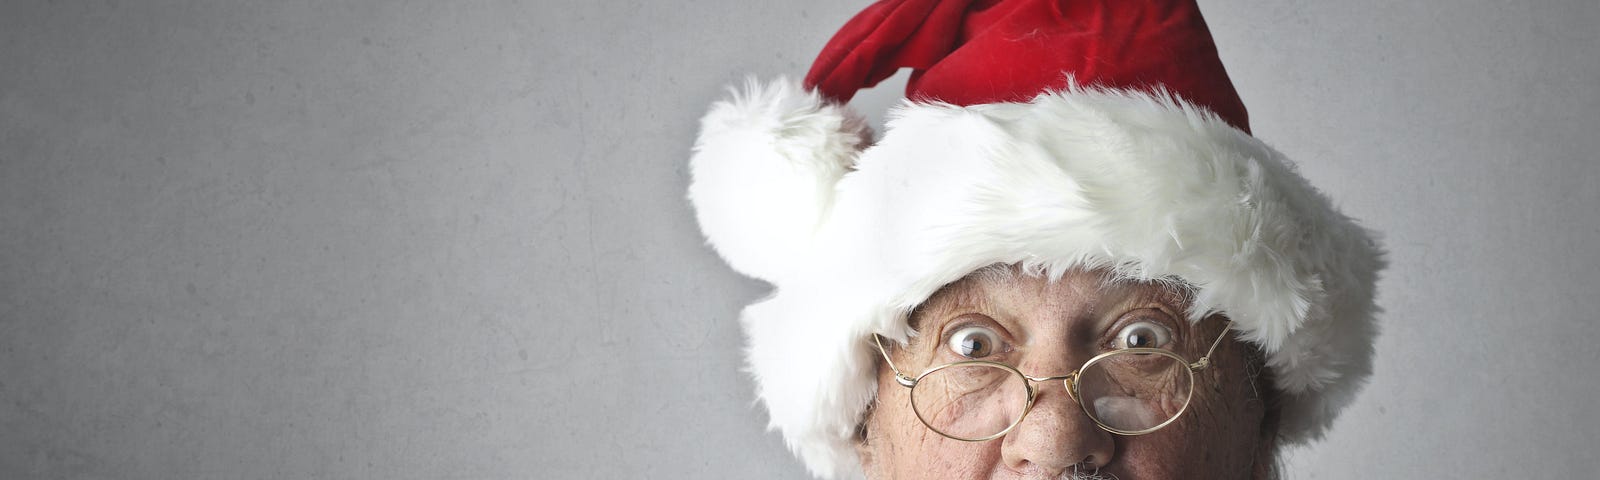 An image of a bearded Santa in red suit and hat and glasses with a shocked face